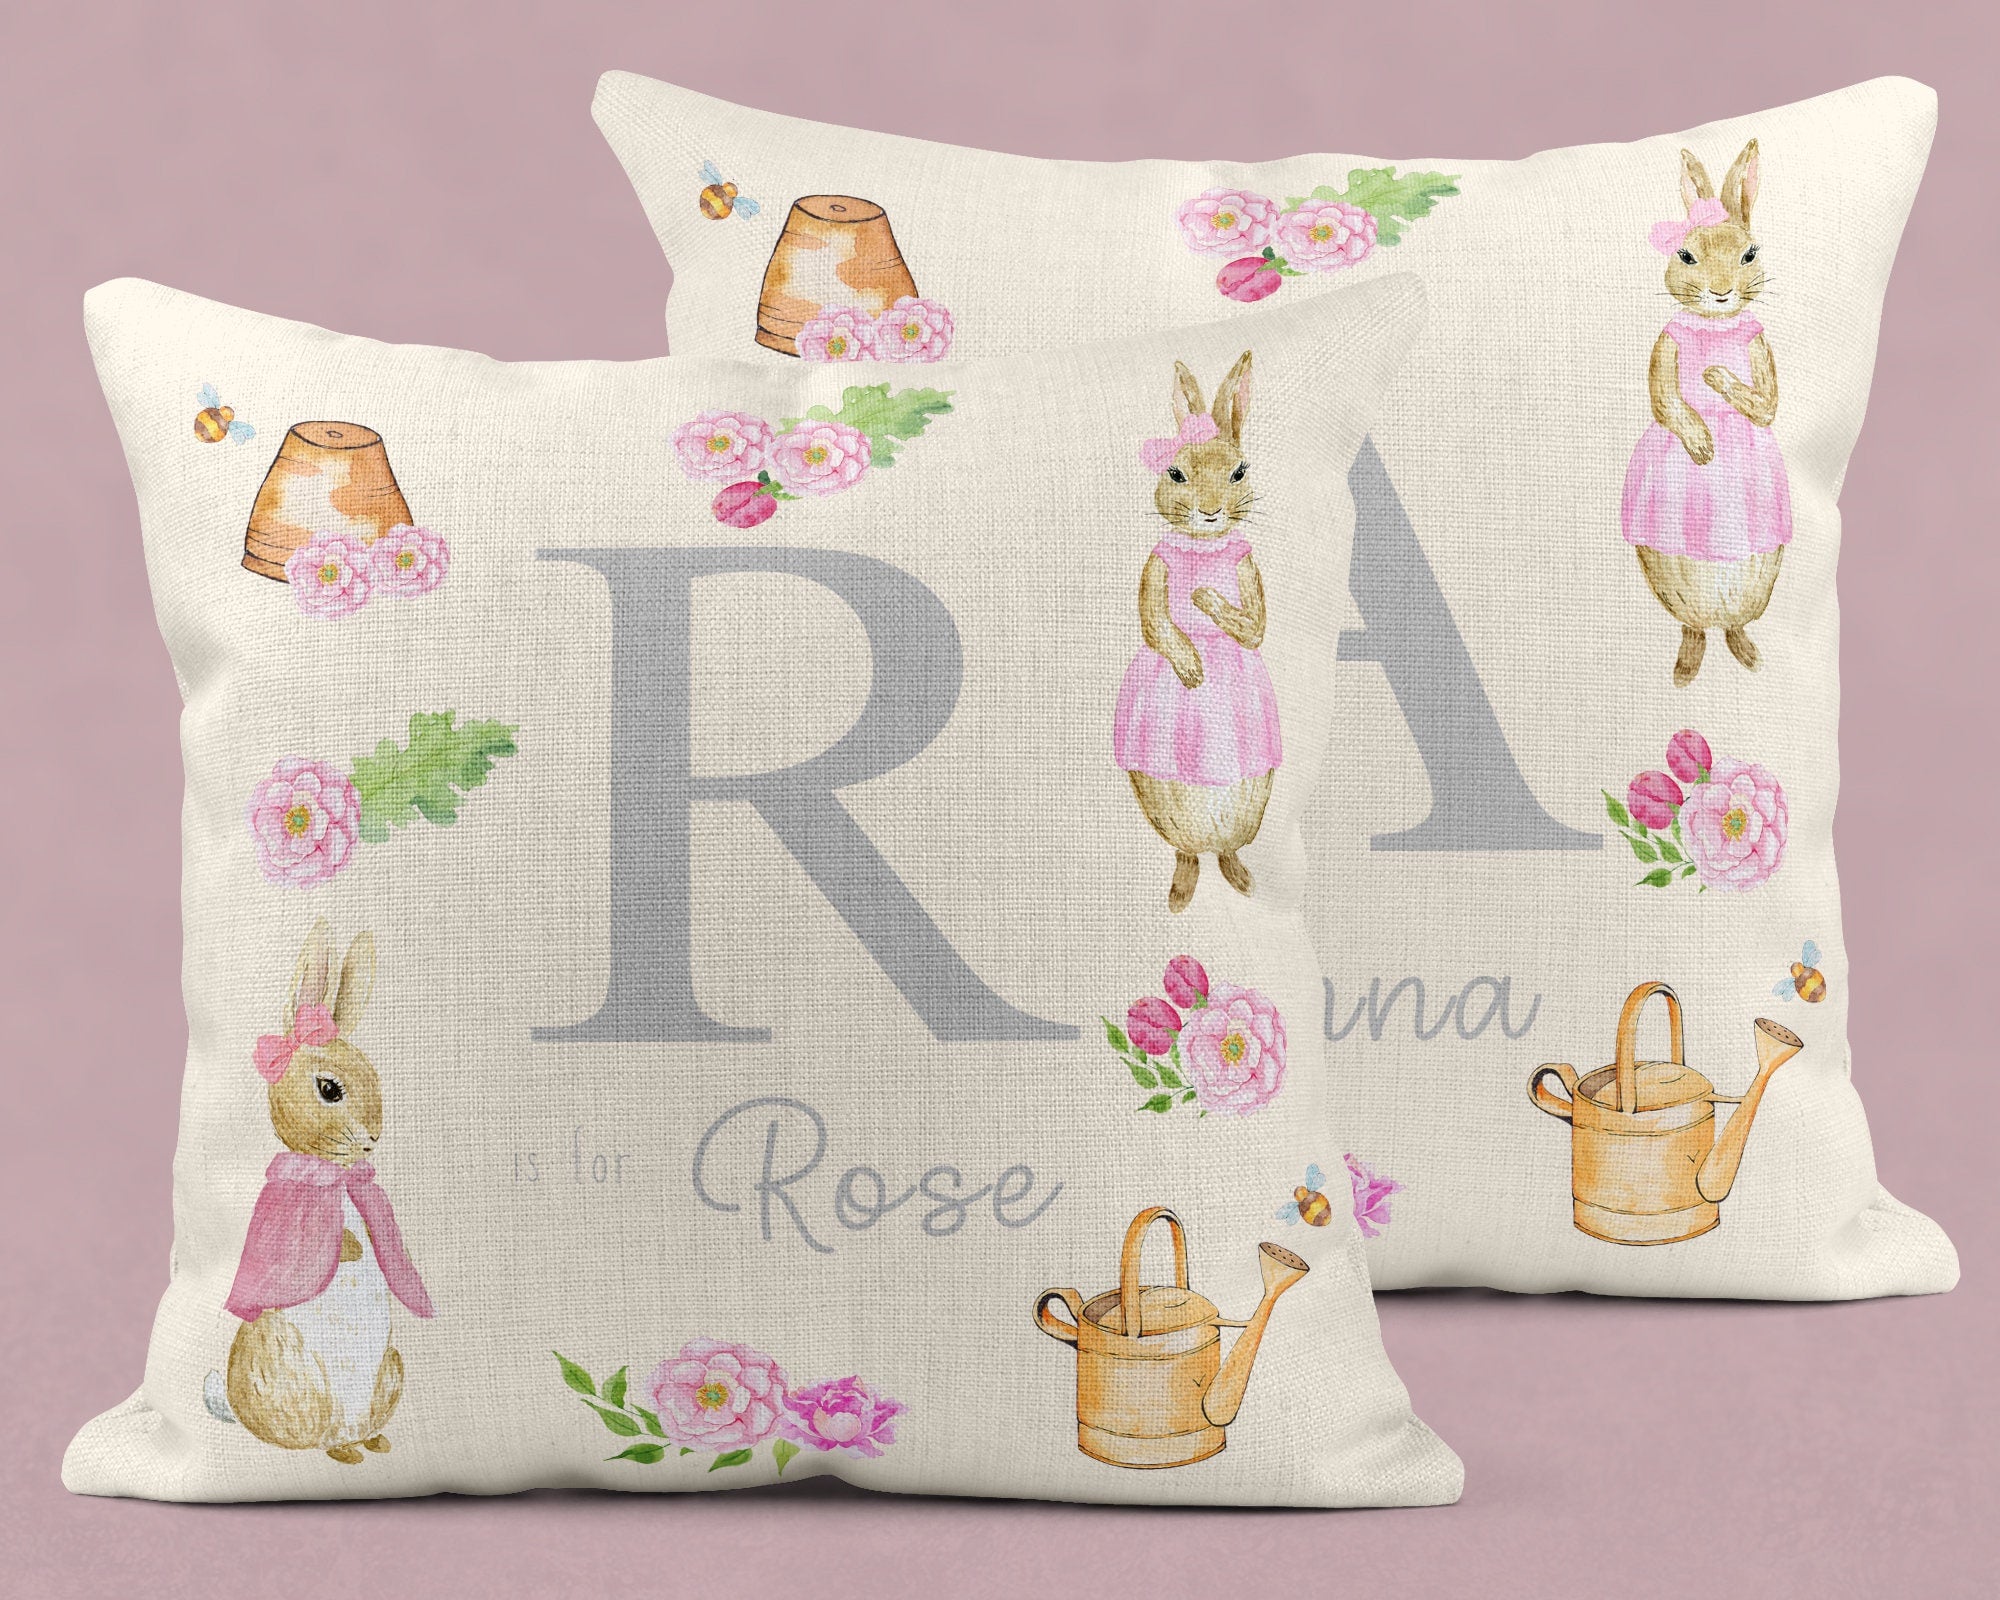 Personalised New Baby Cushion, Welcome To The World Cushion, New Baby Gifts, Rabbit Cushion, New Baby Present, Rabbit, Nursery decor